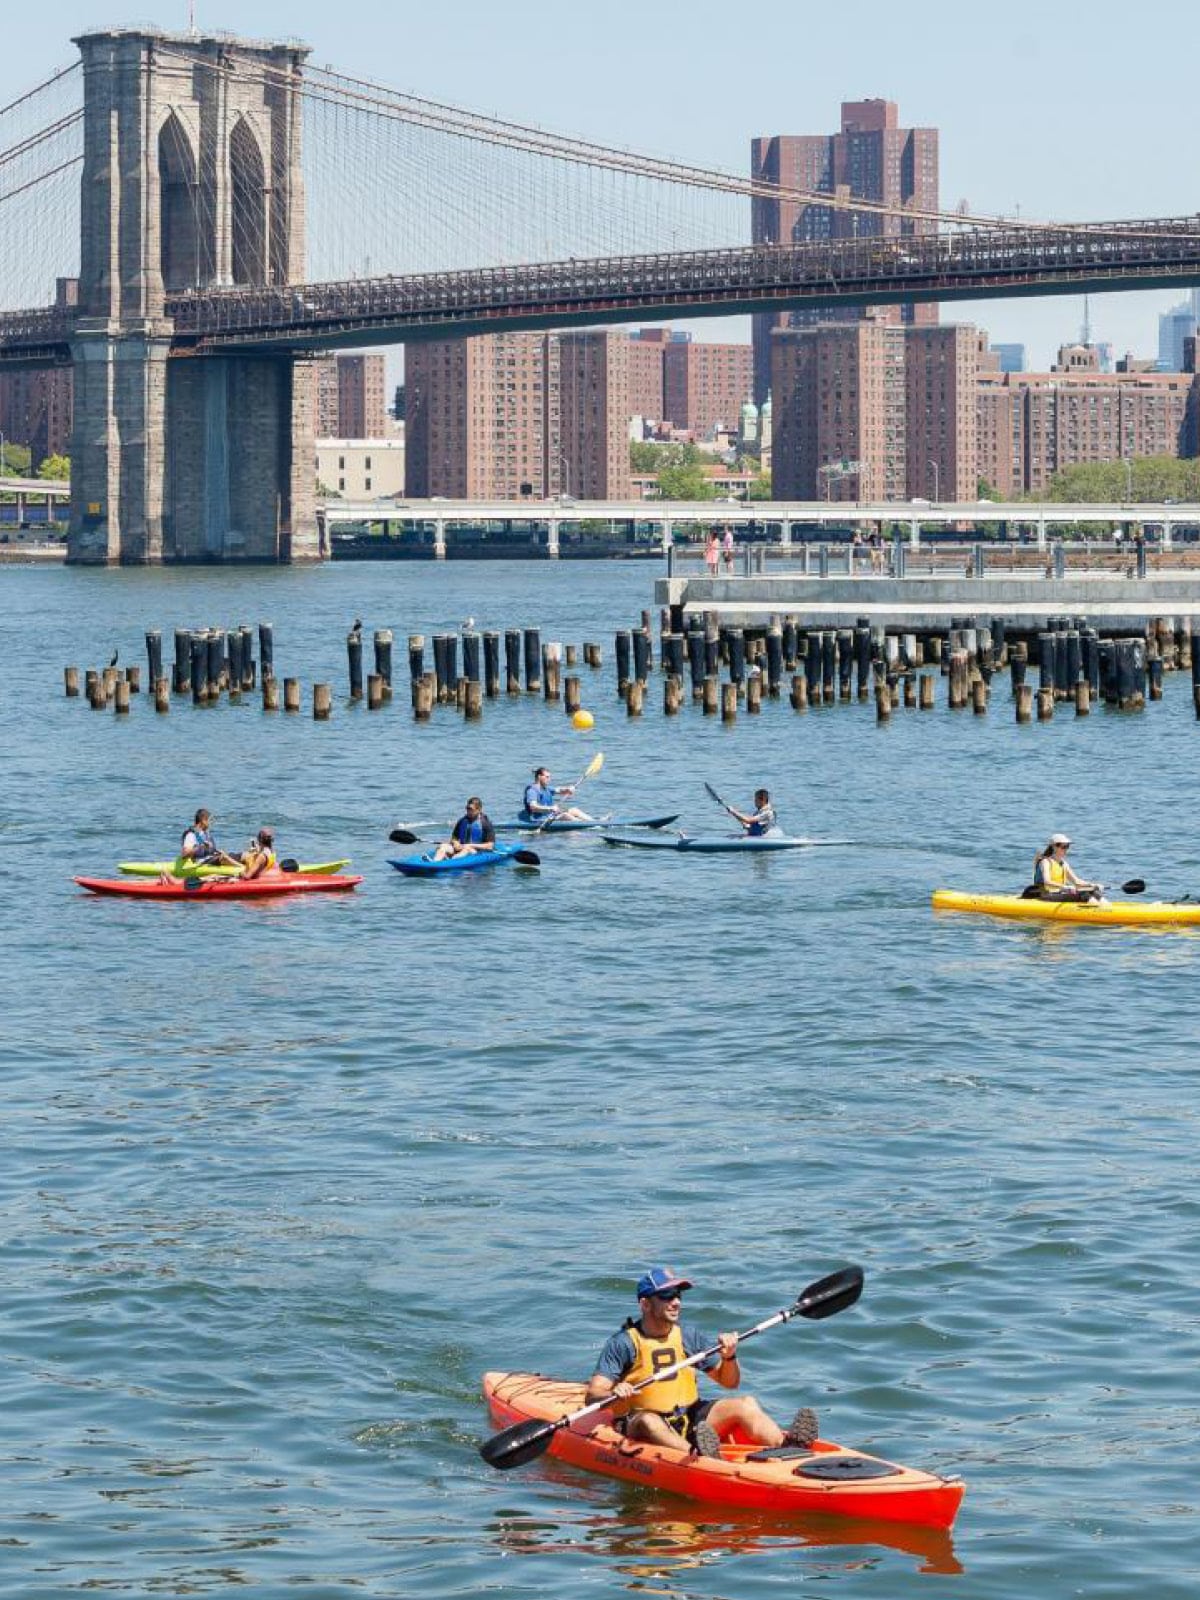 Man kayaking with other kayakers in behind on a sunny day. The Brooklyn Bridge is seen in the distance.